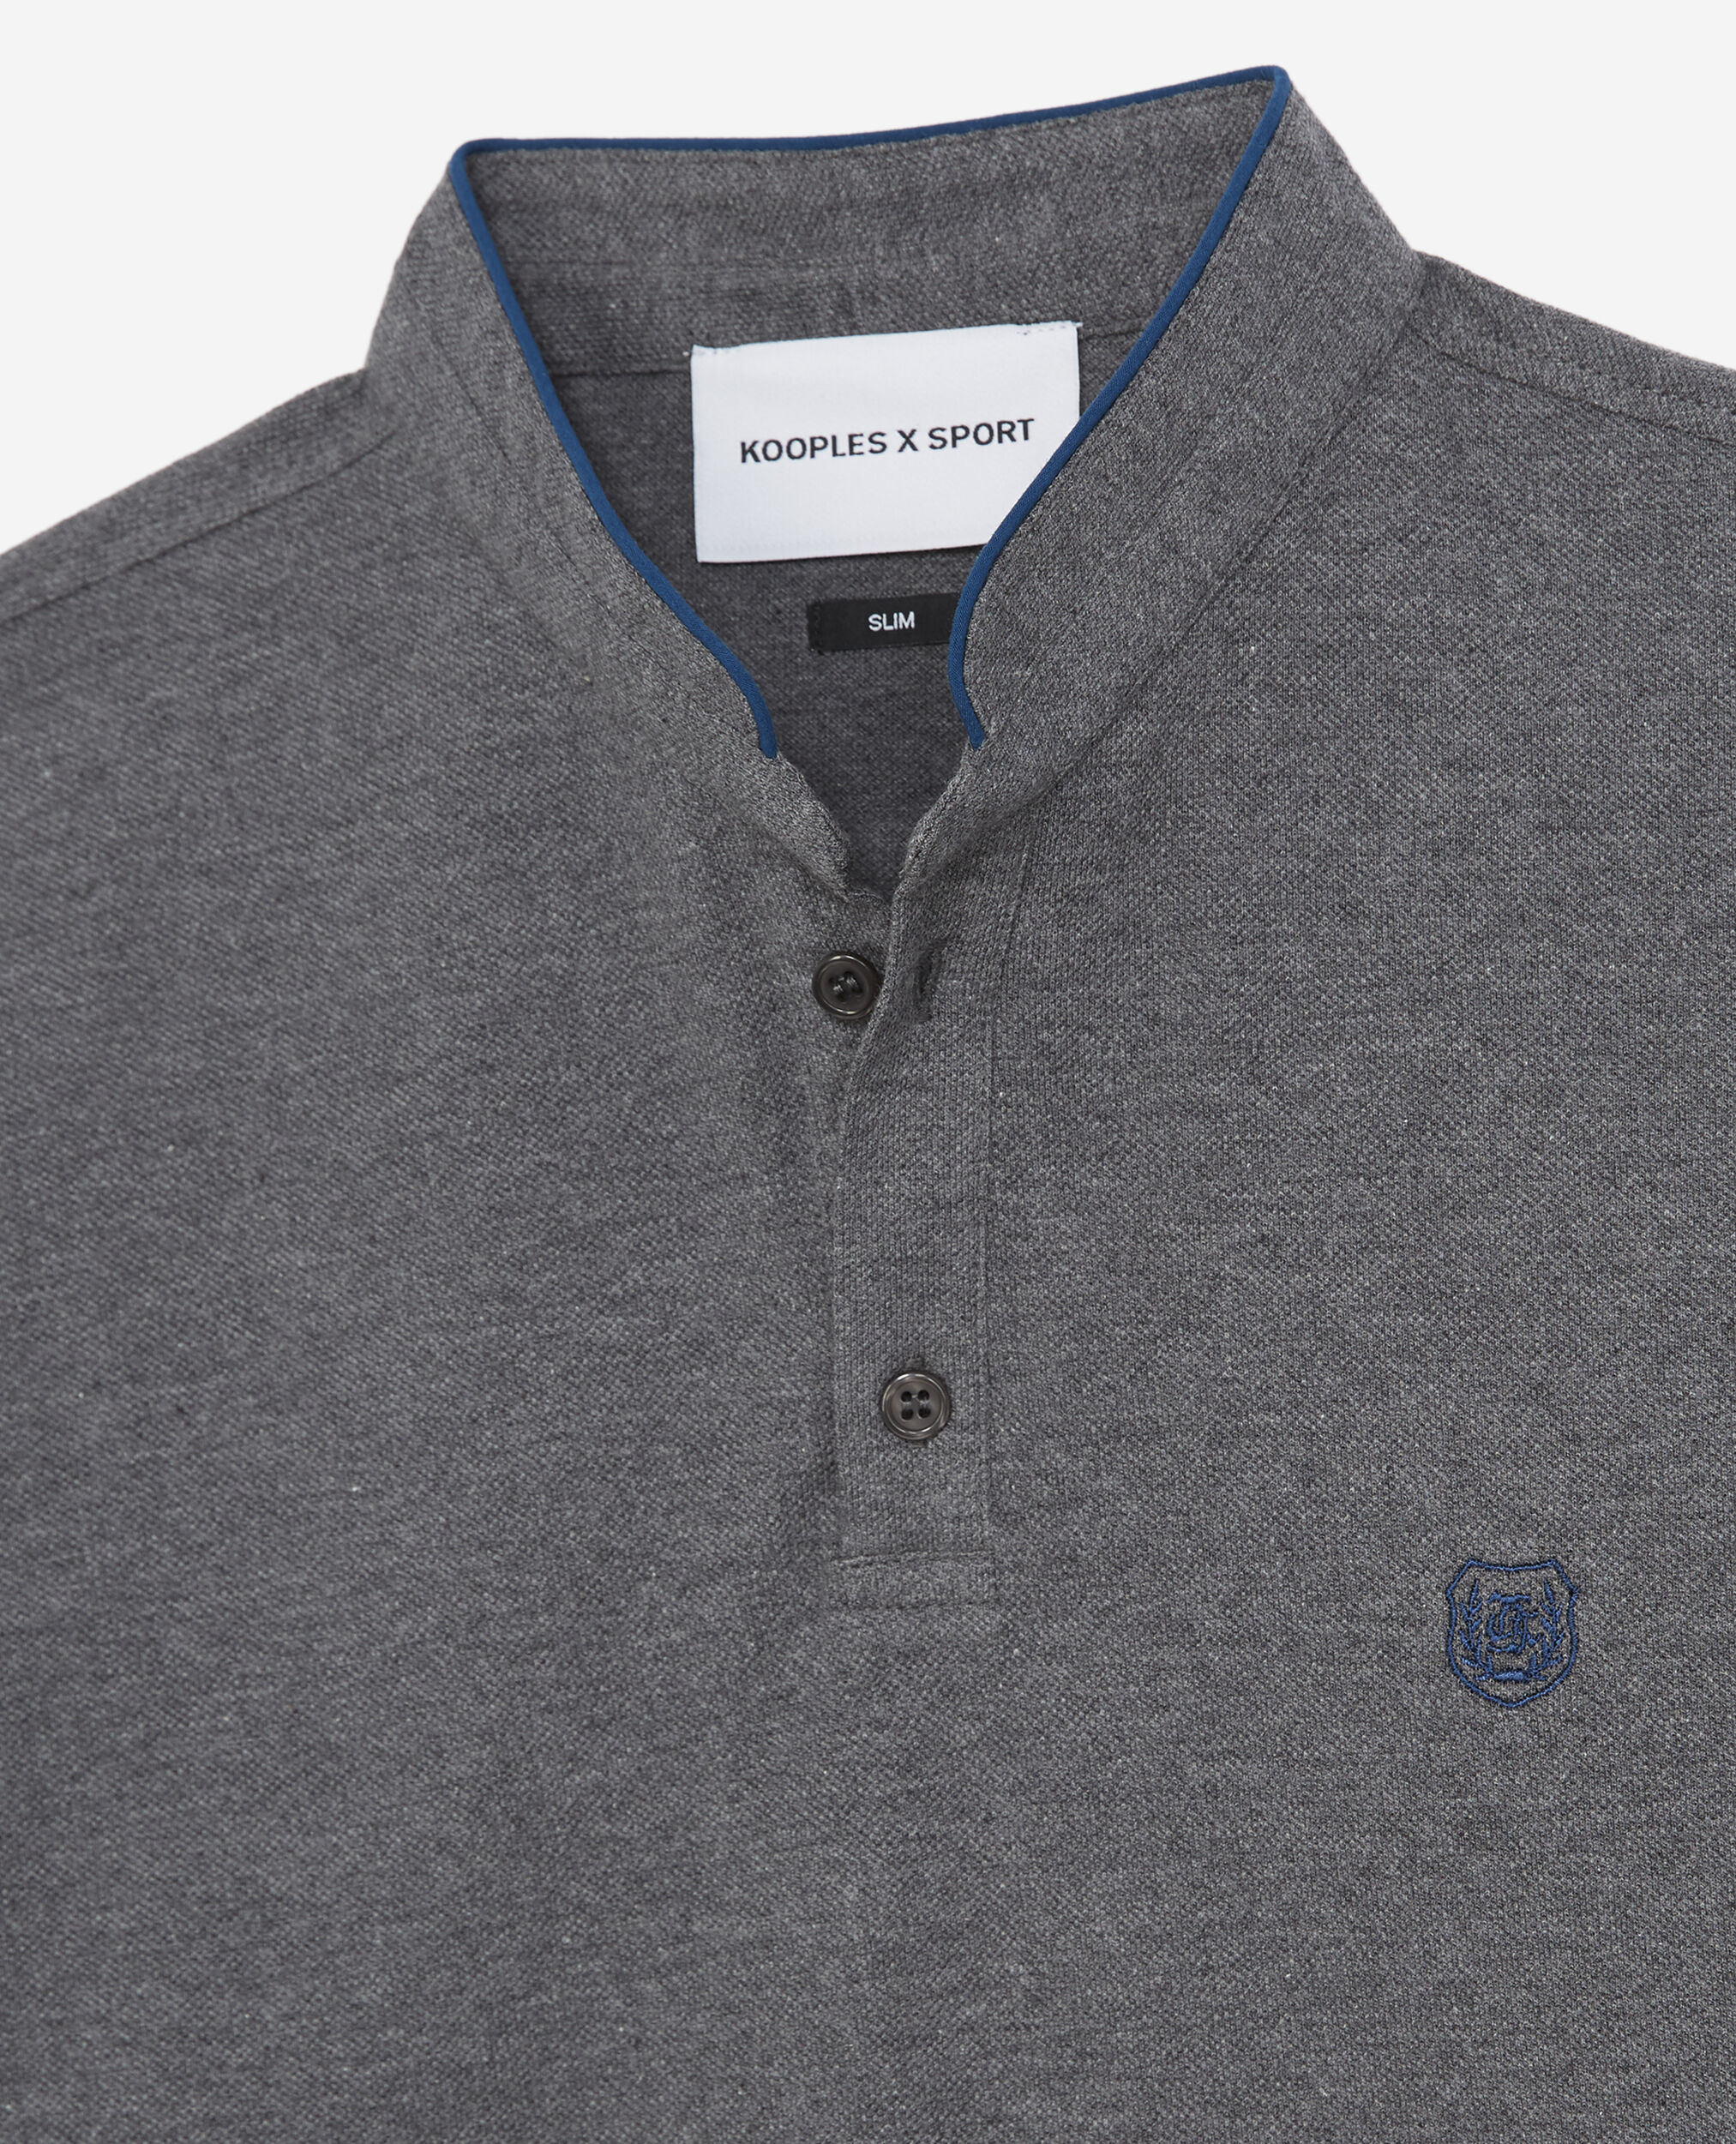 Camisa polo gris, MID GREY / PETROL BLUE, hi-res image number null